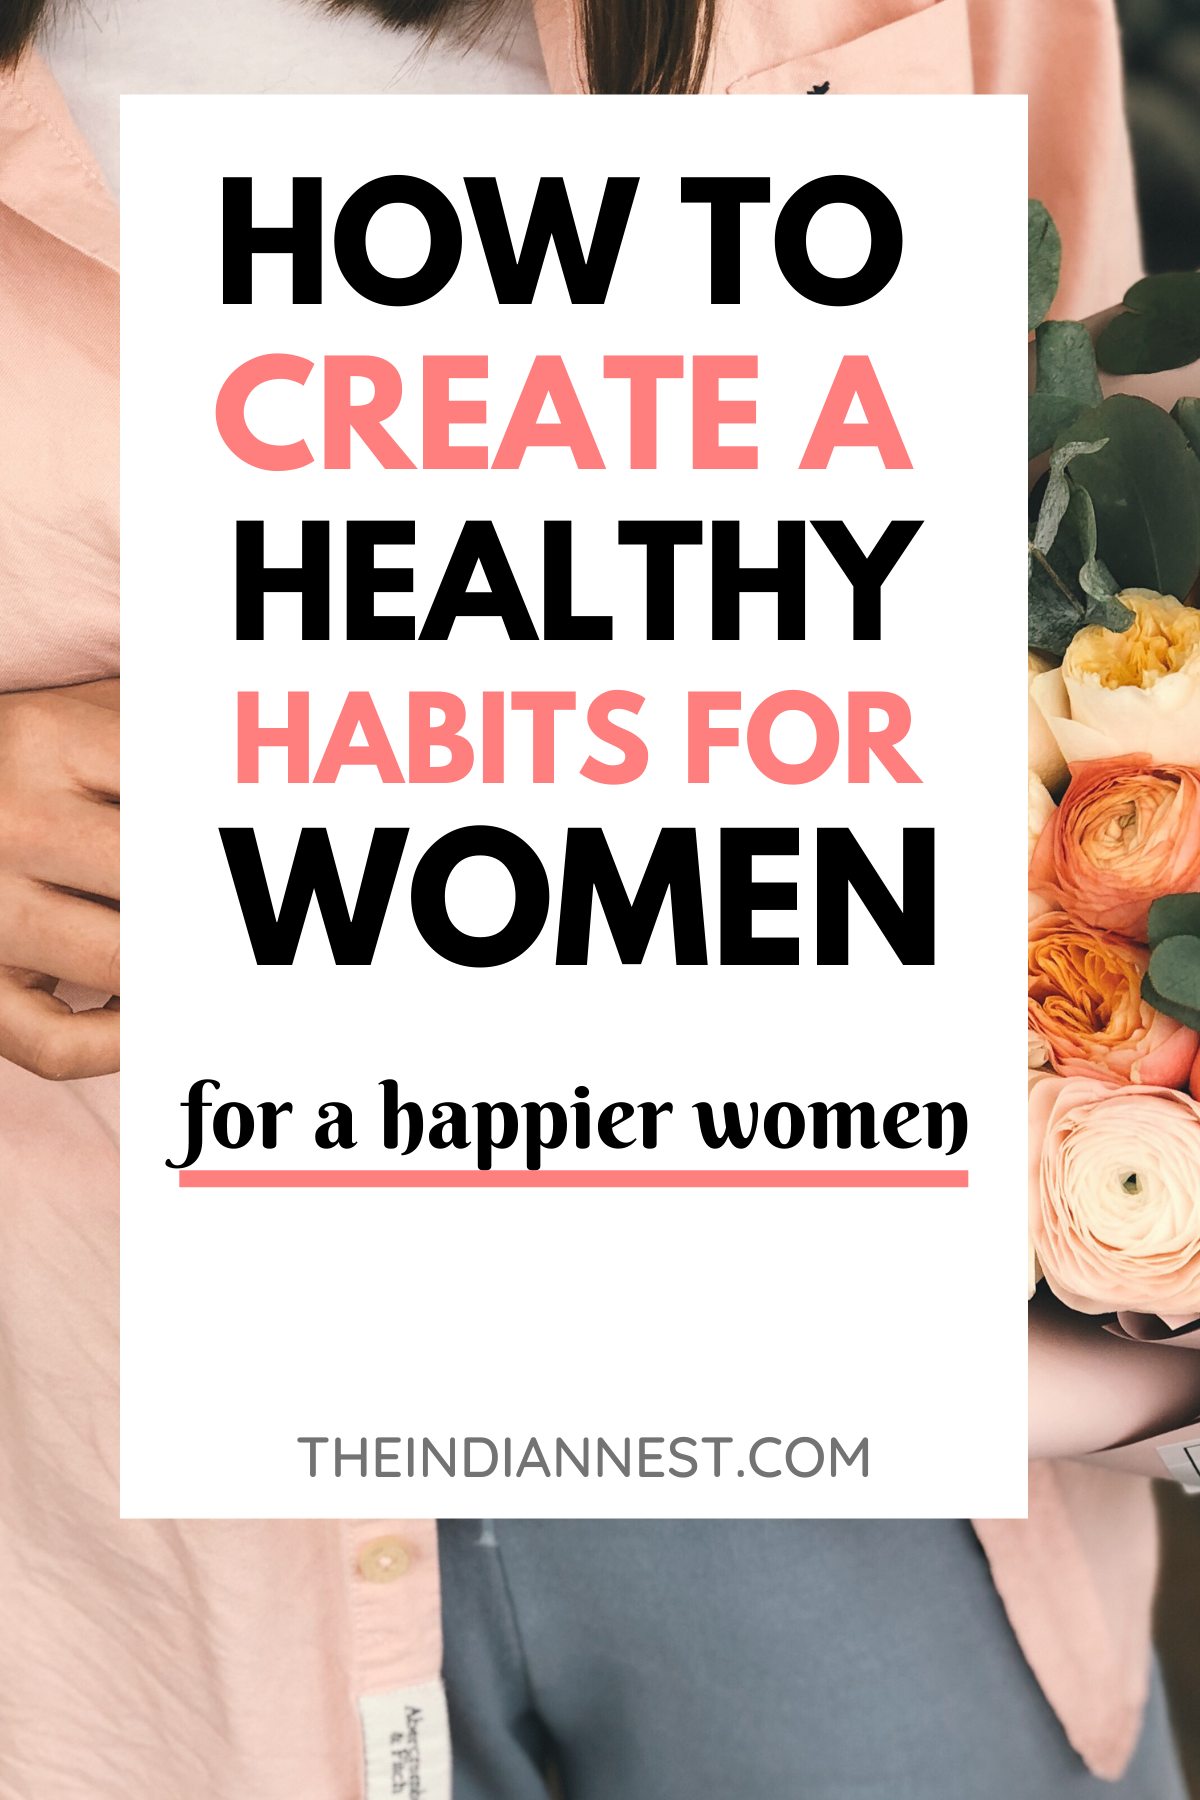 A glimpse at the routines of successful women suggests creating healthy lifestyle habits can help improve work-life habits. it’s hard to break bad habits. But when it comes to building healthy habits, small decisions add up over time.  